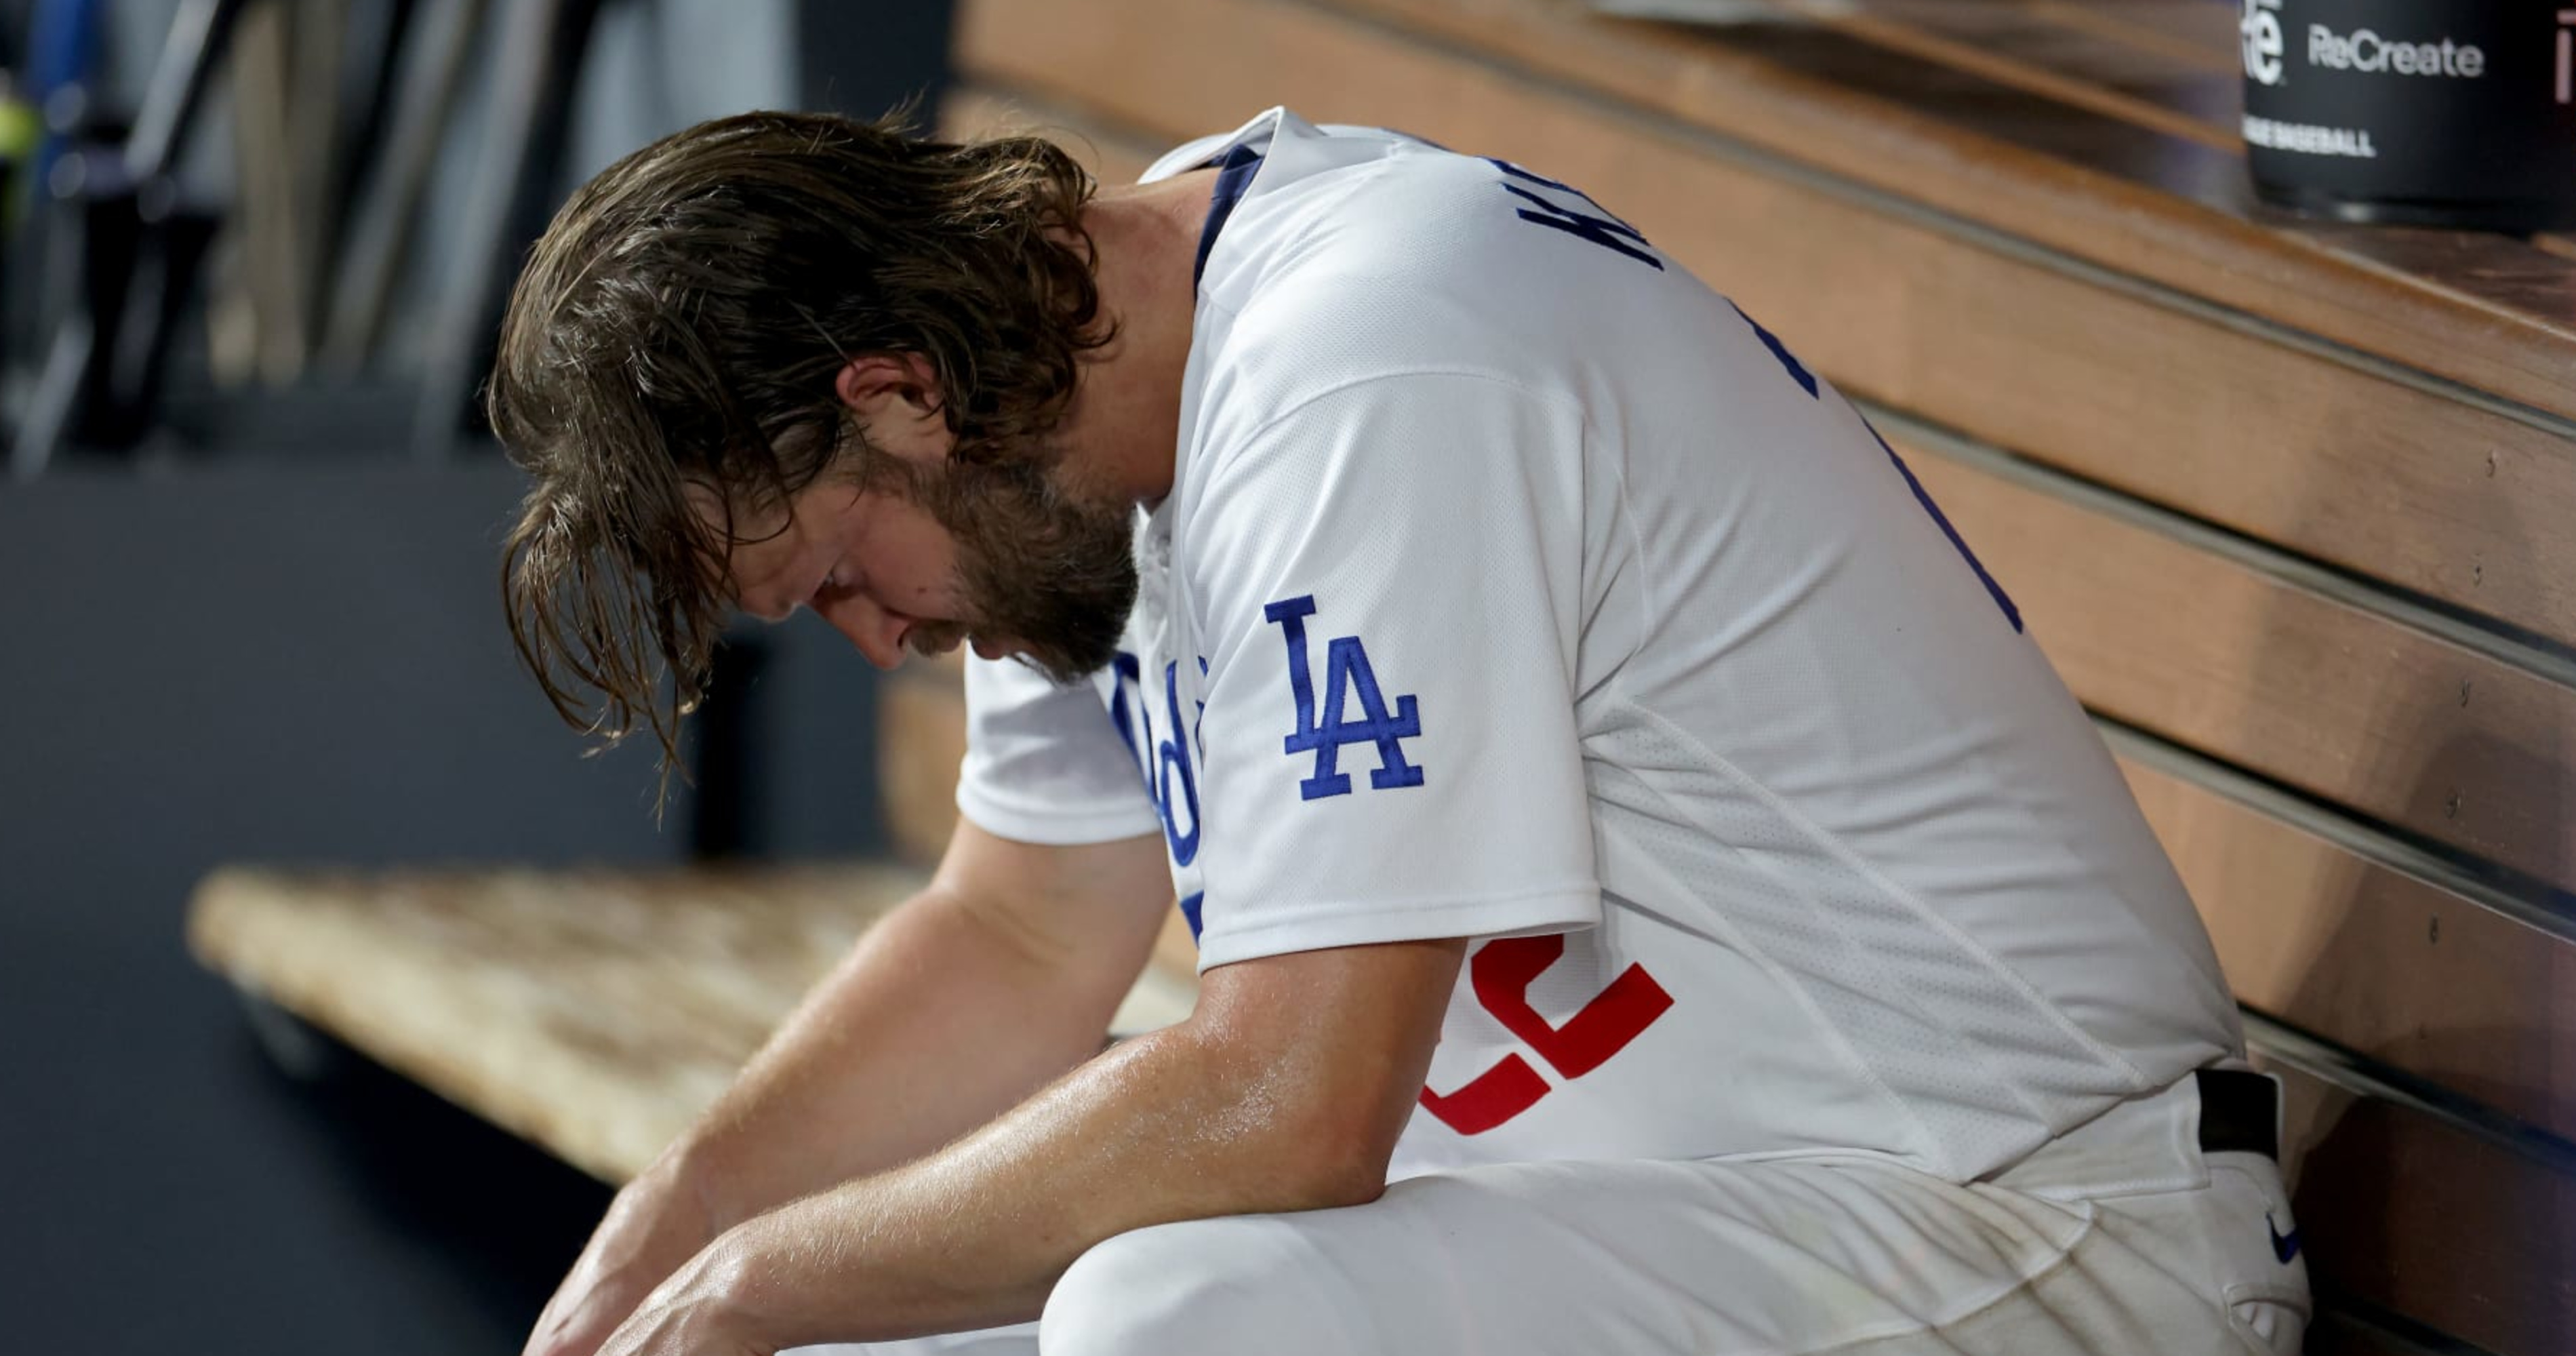 Dodgers' Clayton Kershaw exits with back pain before sweep